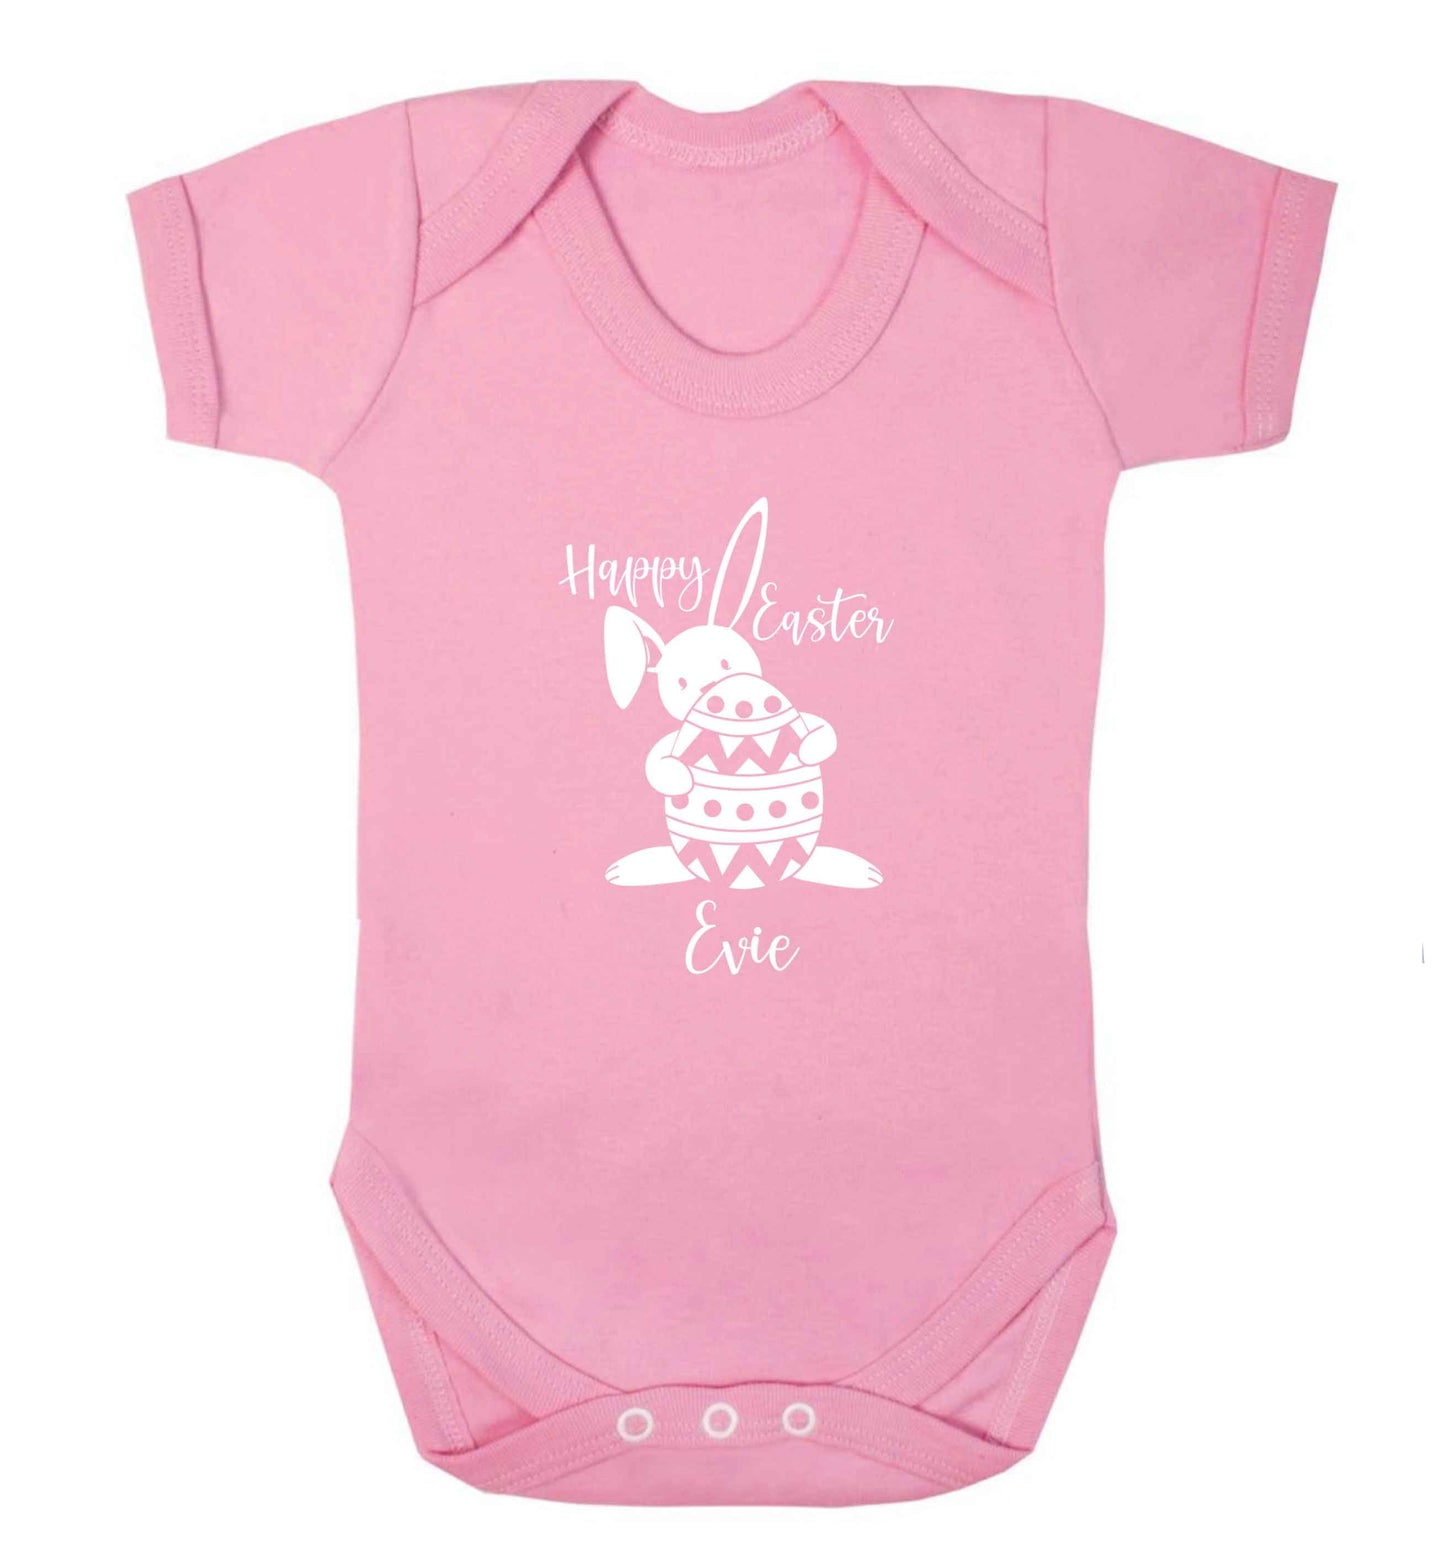 Happy Easter - personalised baby vest pale pink 18-24 months